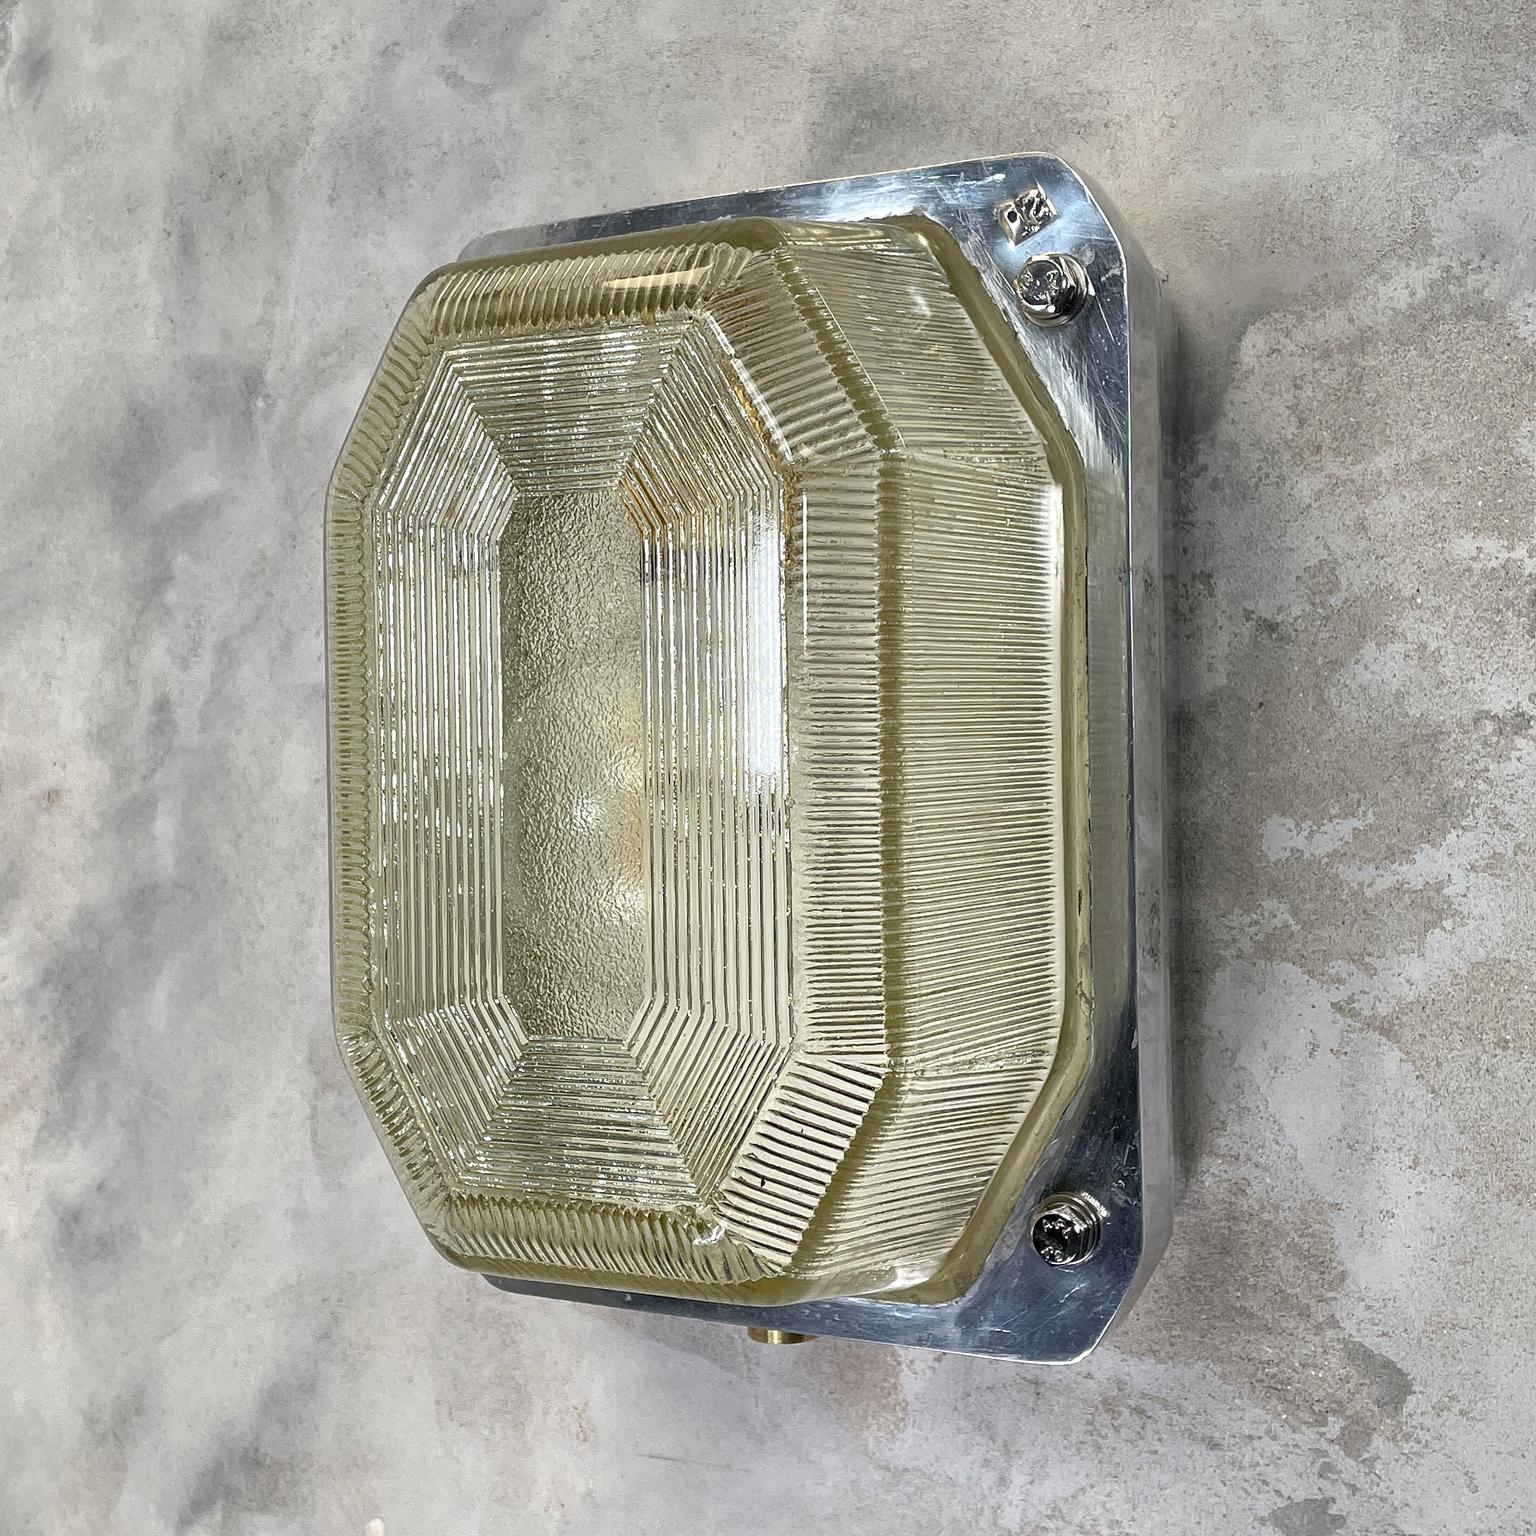 Are British made bulkhead lamp by Victor a manufacturer of lighting for use in hazardous locations such oil rigs, mines and large sea going vessels.

The main body of the lamp is reeded / prismatic glass which gives a soft diffusion output of